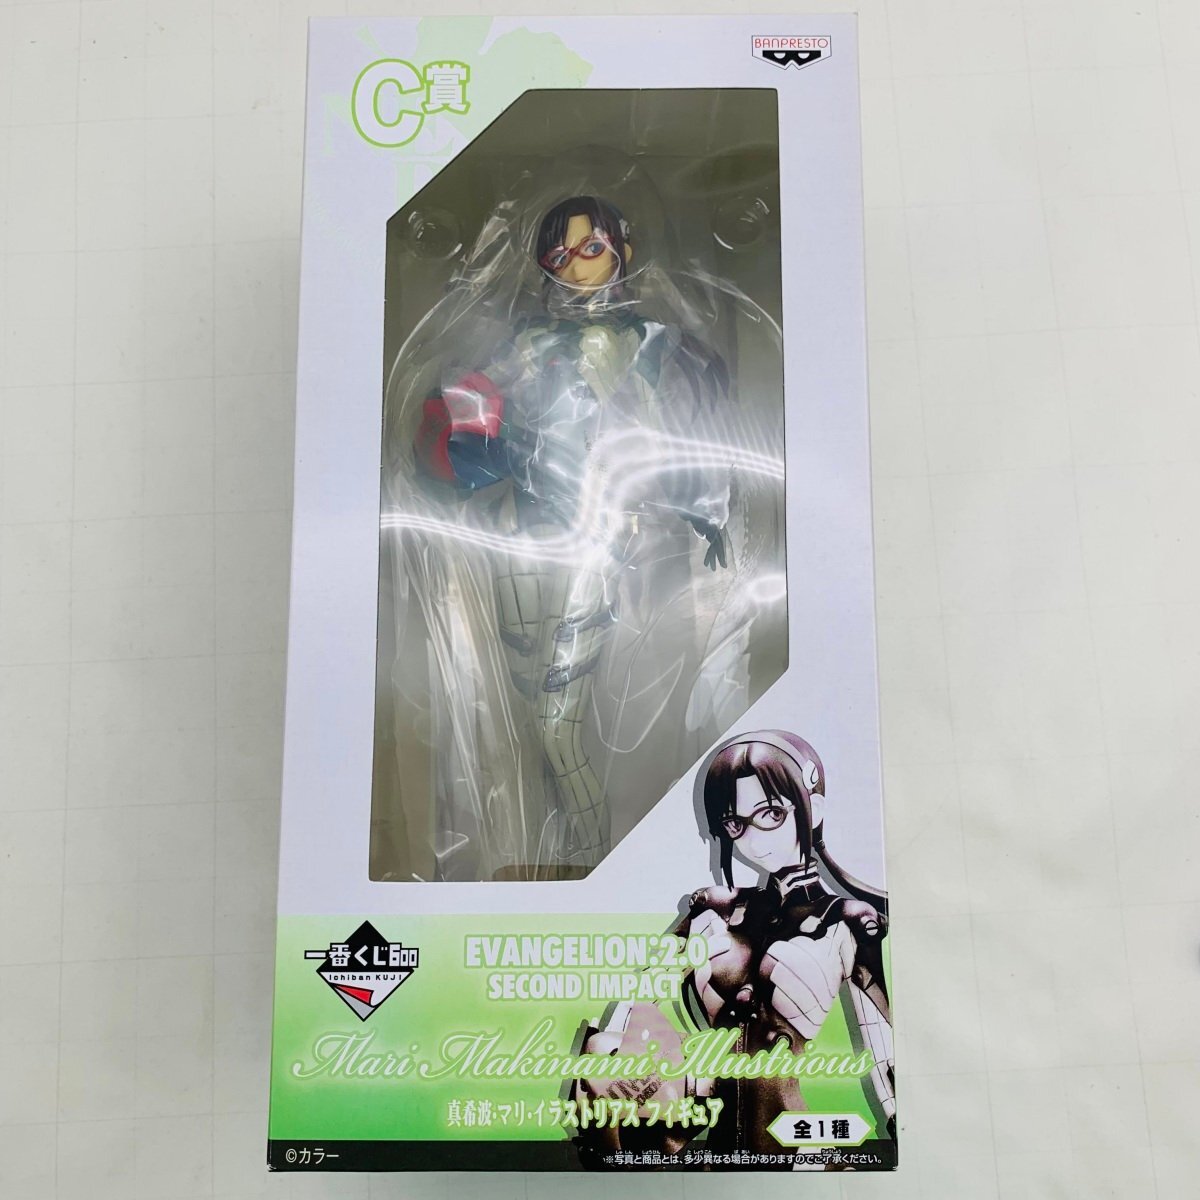  new goods unopened most lot e Van geli.n new theater version Second impact C. genuine . wave * Mali * illustration rear s figure 